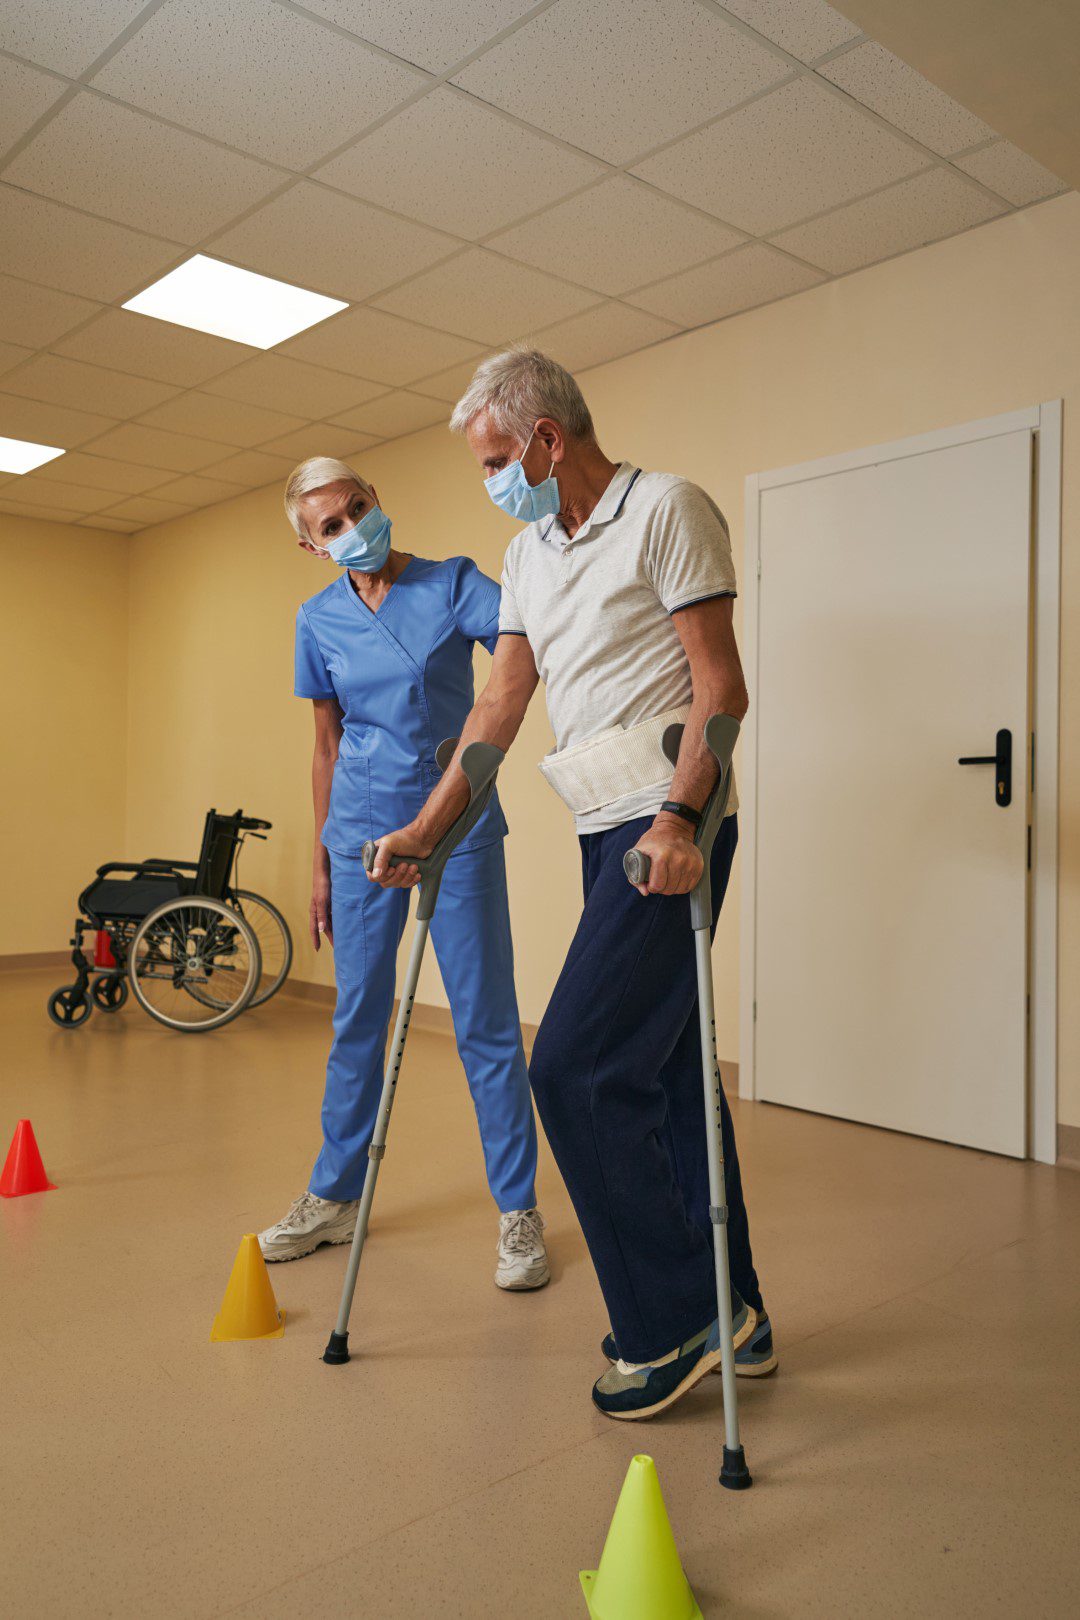 Physical therapist working with a workplace injury patient